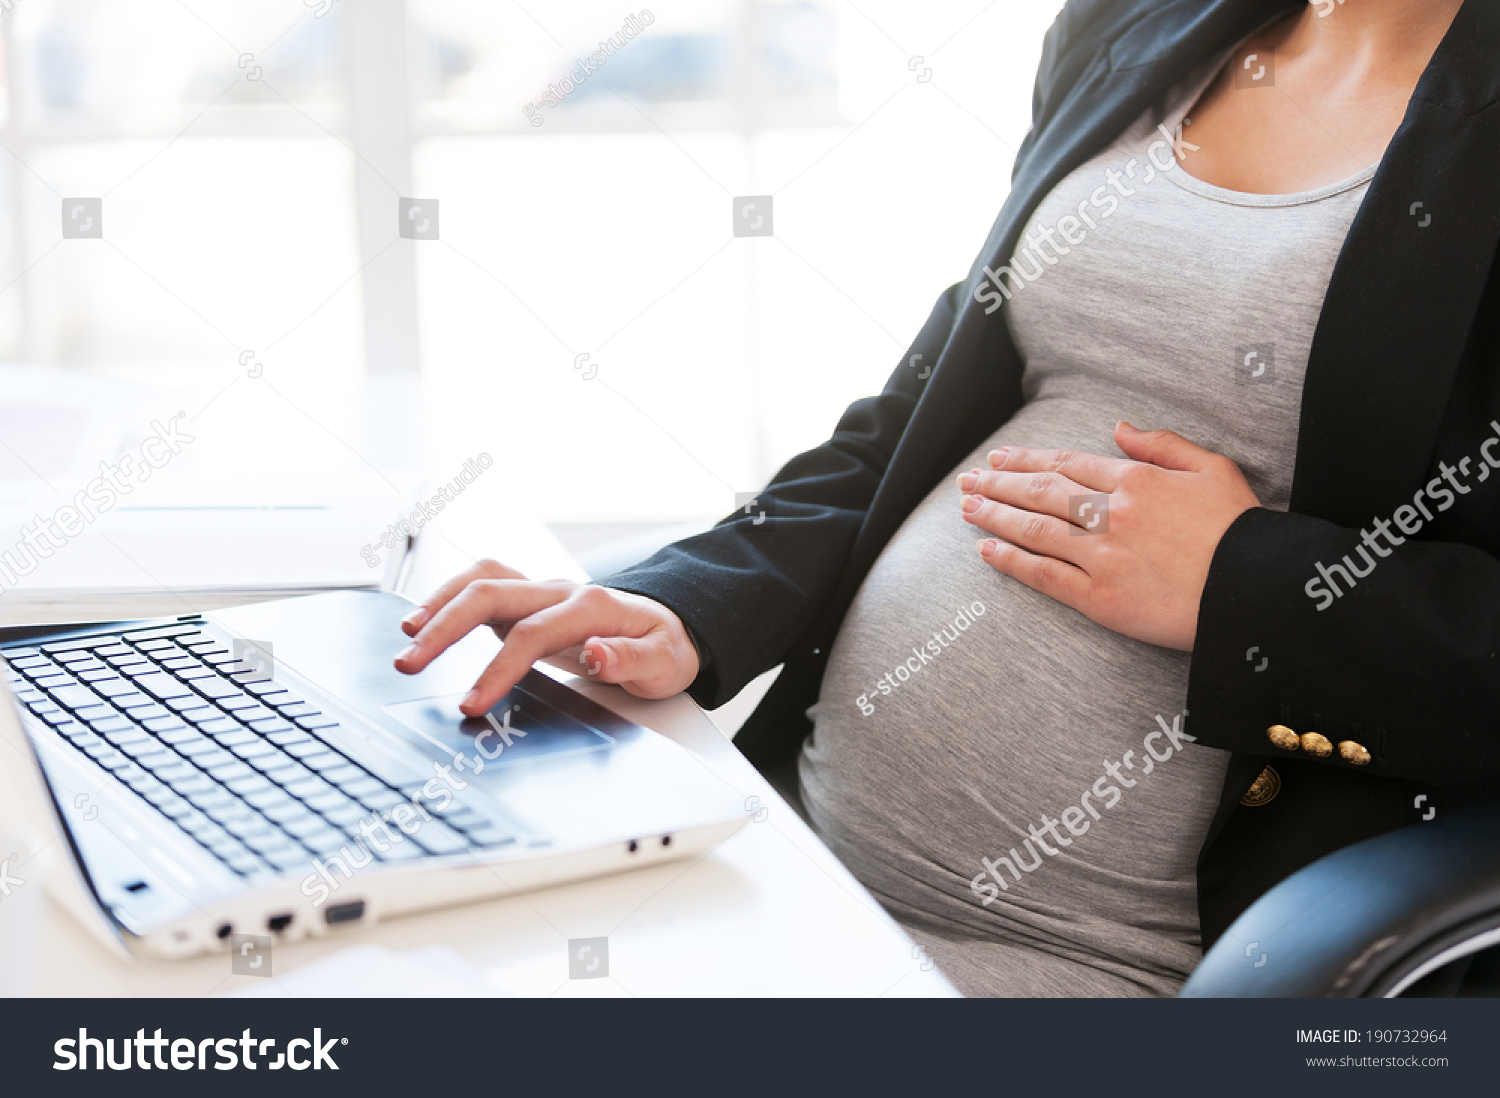 Laptop While Pregnant 88